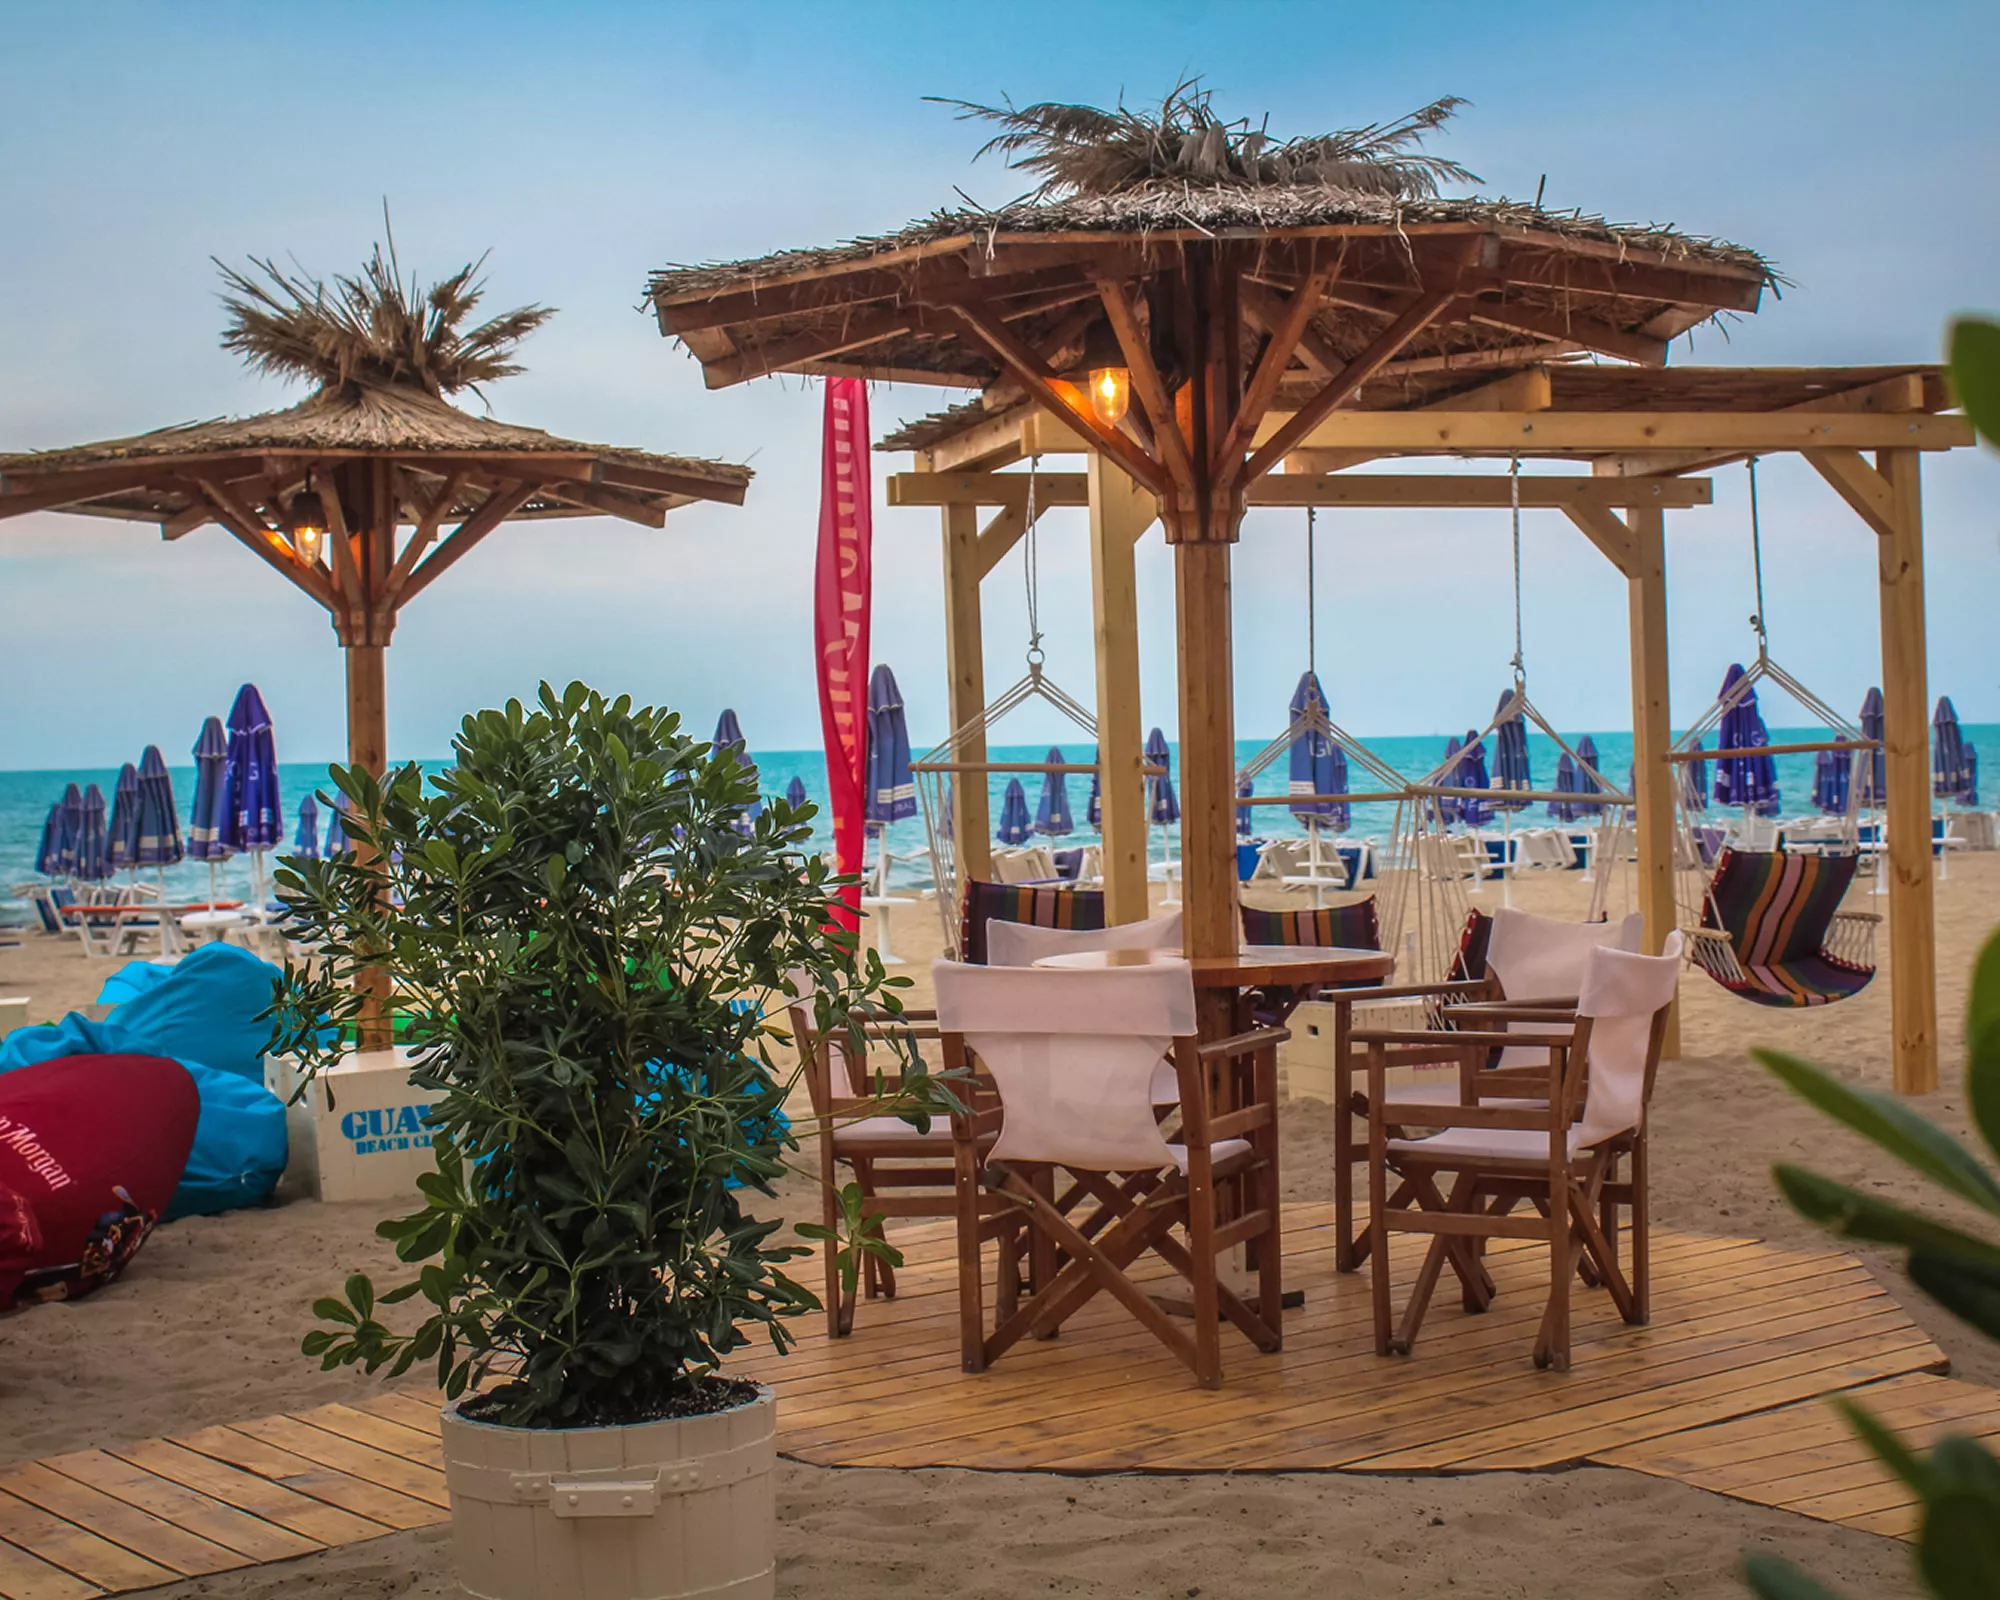 Guava Beach Club in Bulgaria, Europe | Day and Beach Clubs - Rated 3.7